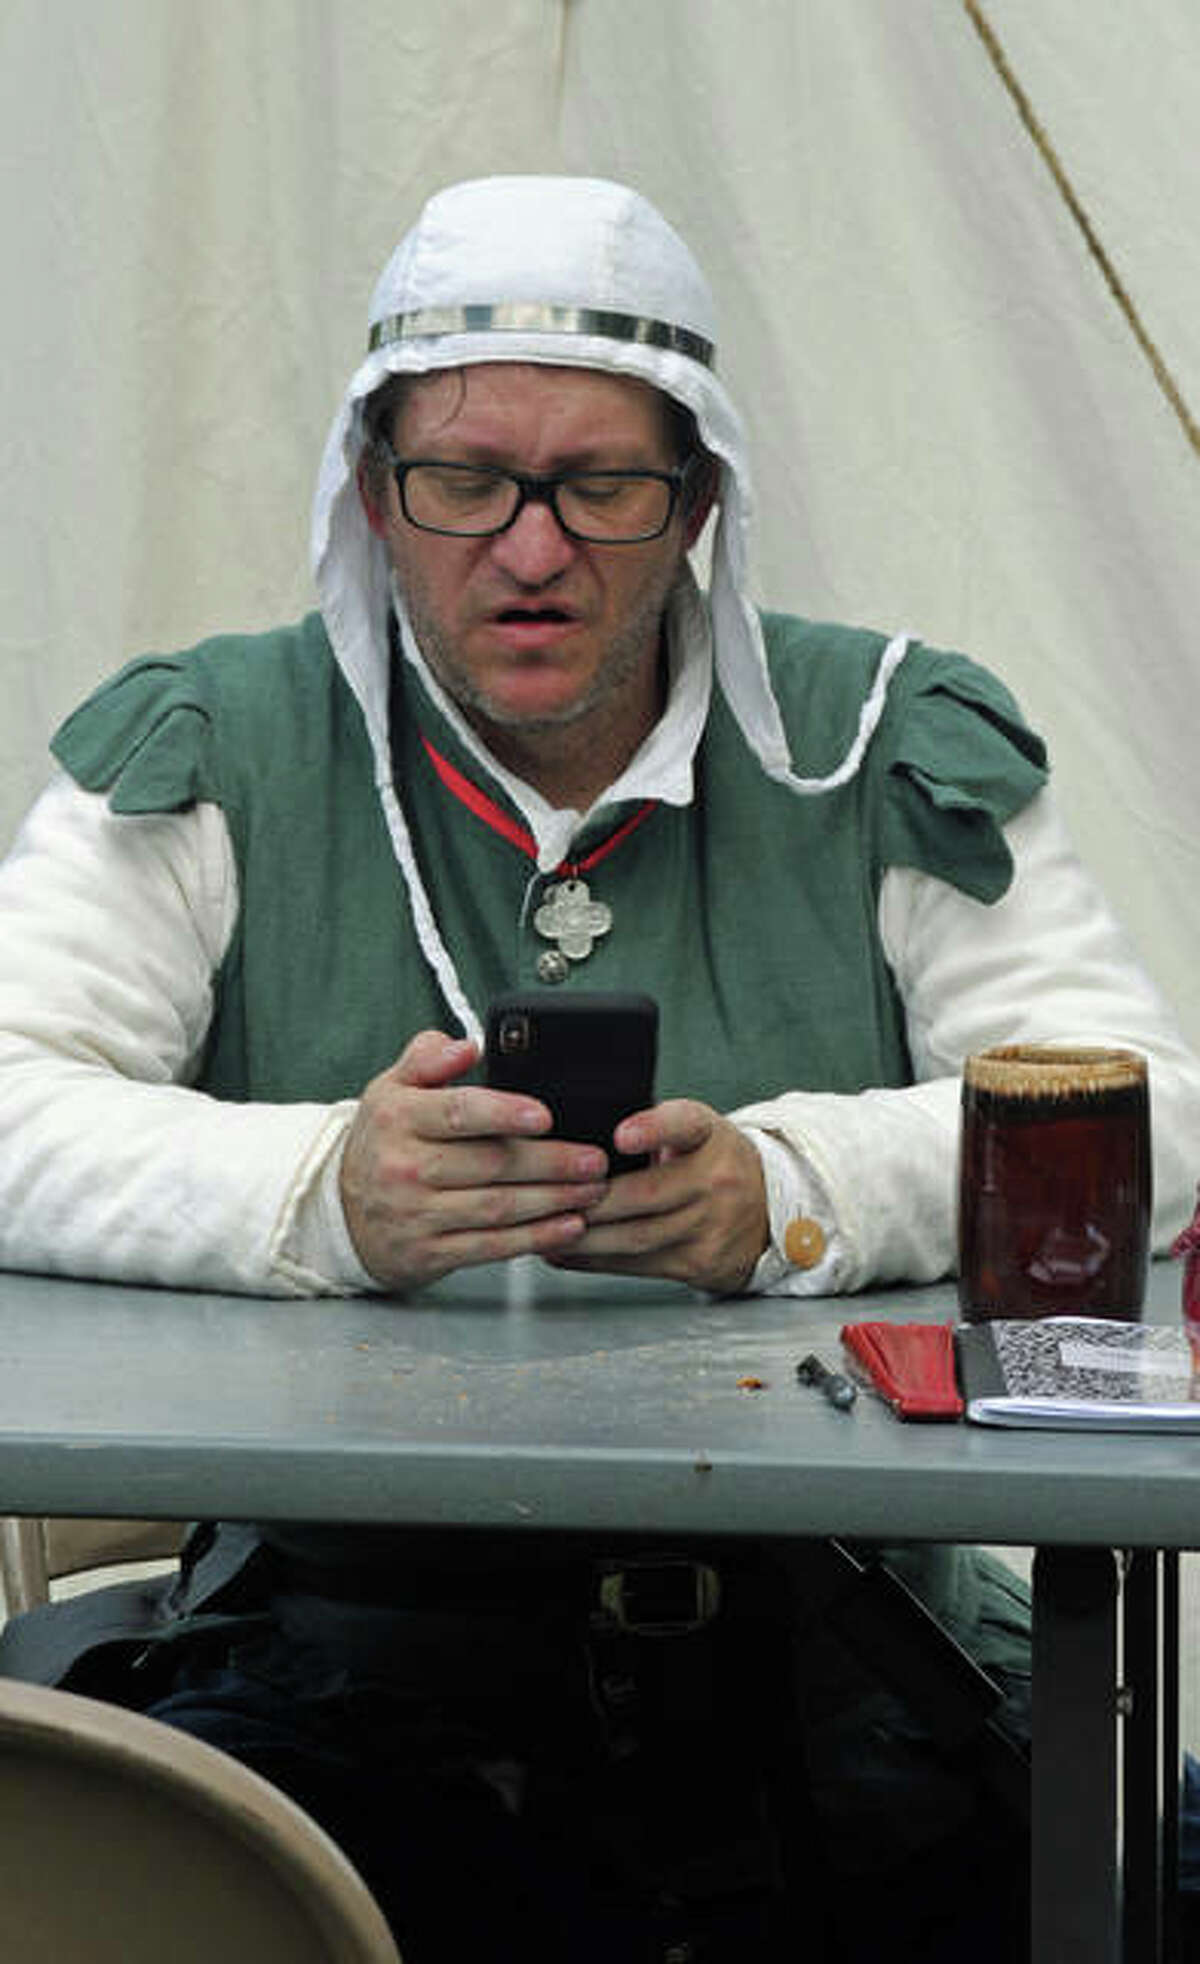 A Renaissance re-enactor checks his modern day messages during a break in the Bardic Congress and Cooks Collegium. The event ran Friday through Monday at Wood River’s Camp Dubois.